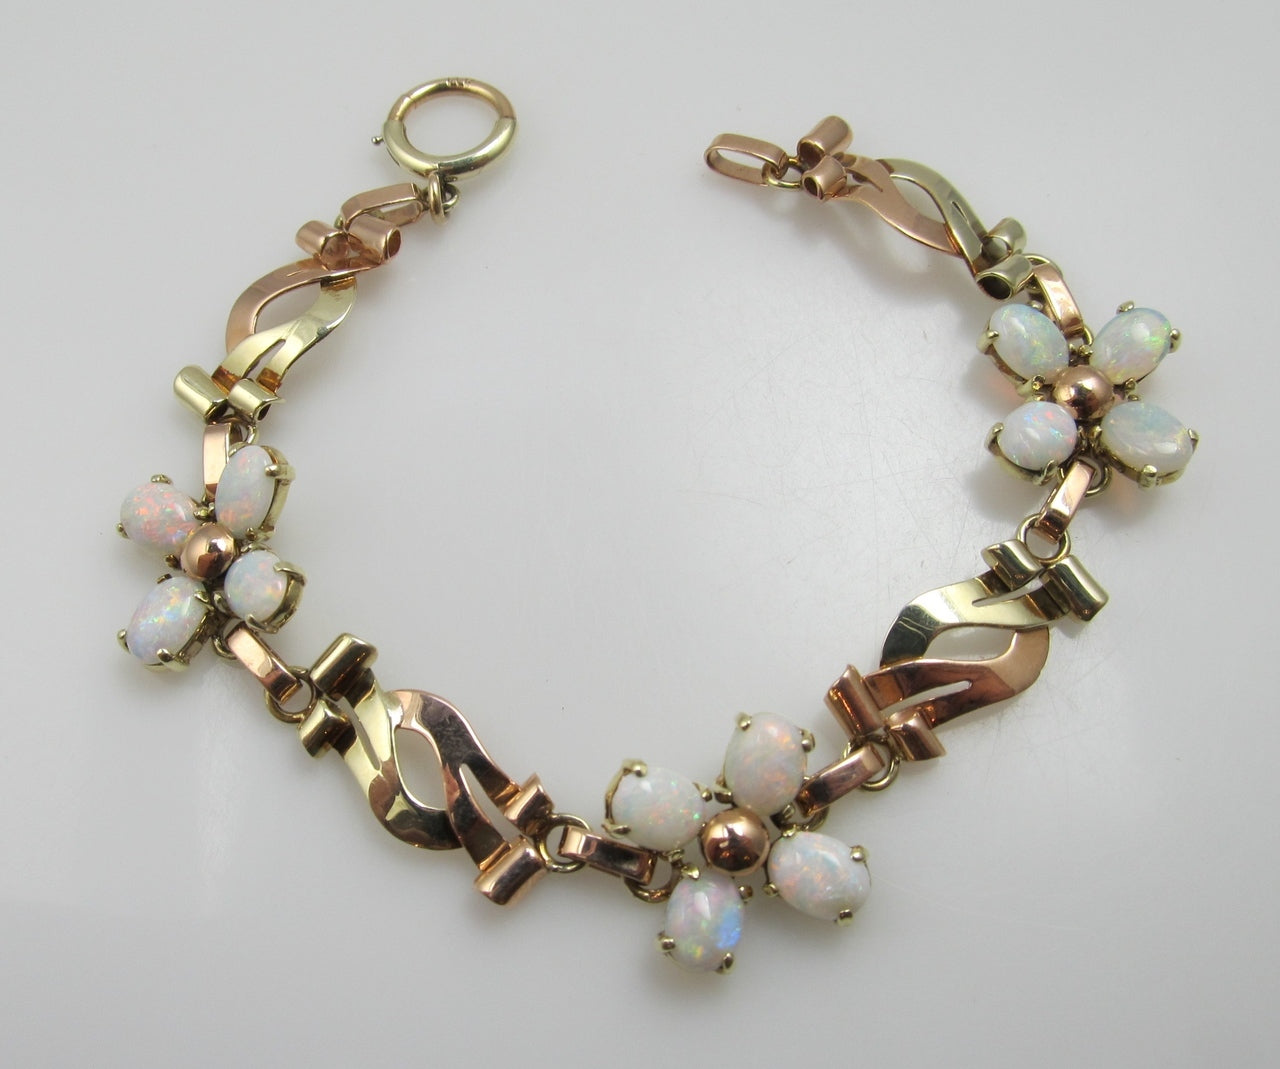 Vintage Retro 14k Rose And Yellow Gold Bracelet With Opals, Circa 1940